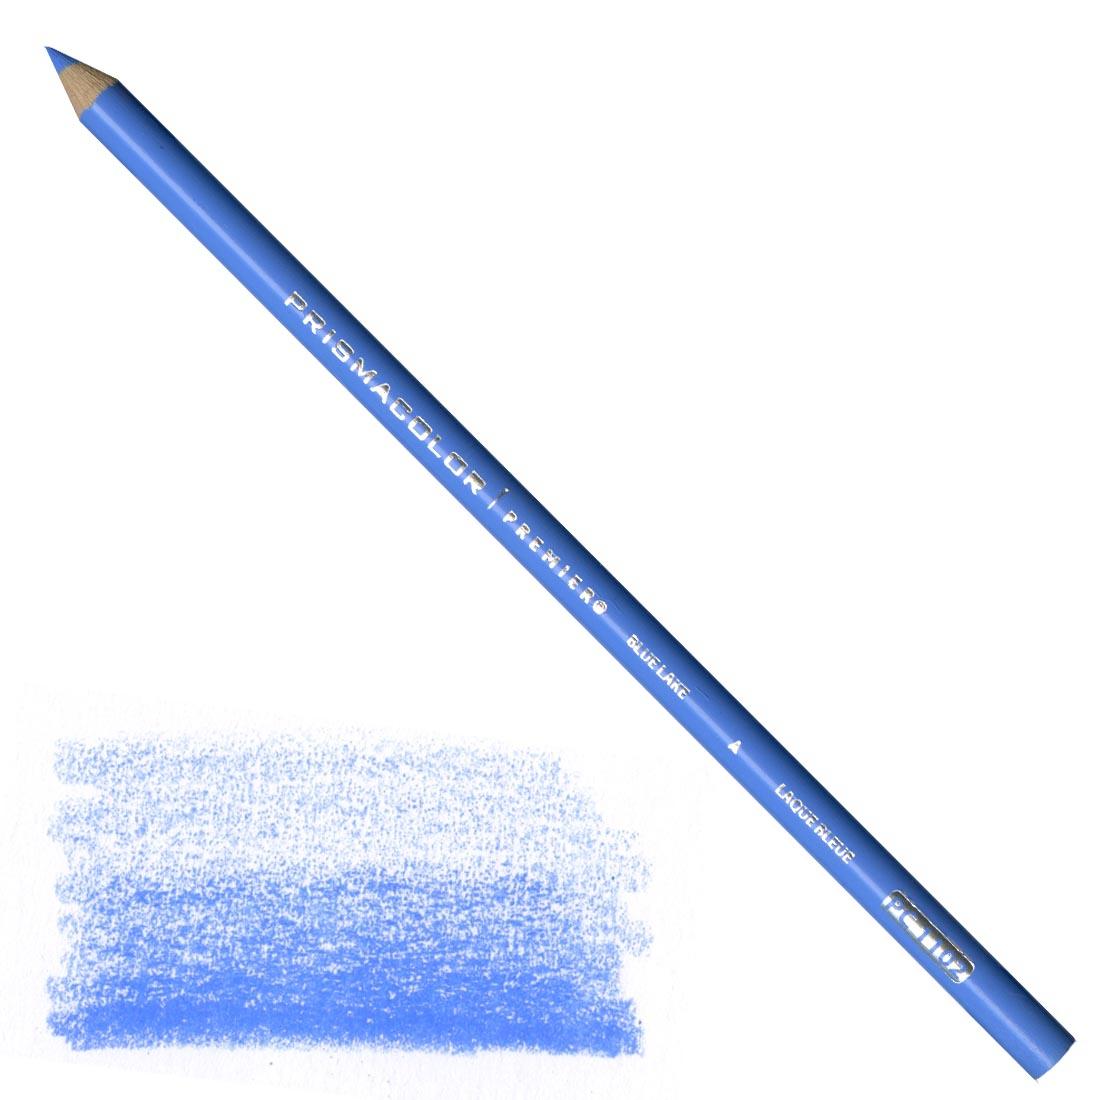 Blue Lake Prismacolor Premier Colored Pencil with a sample colored swatch